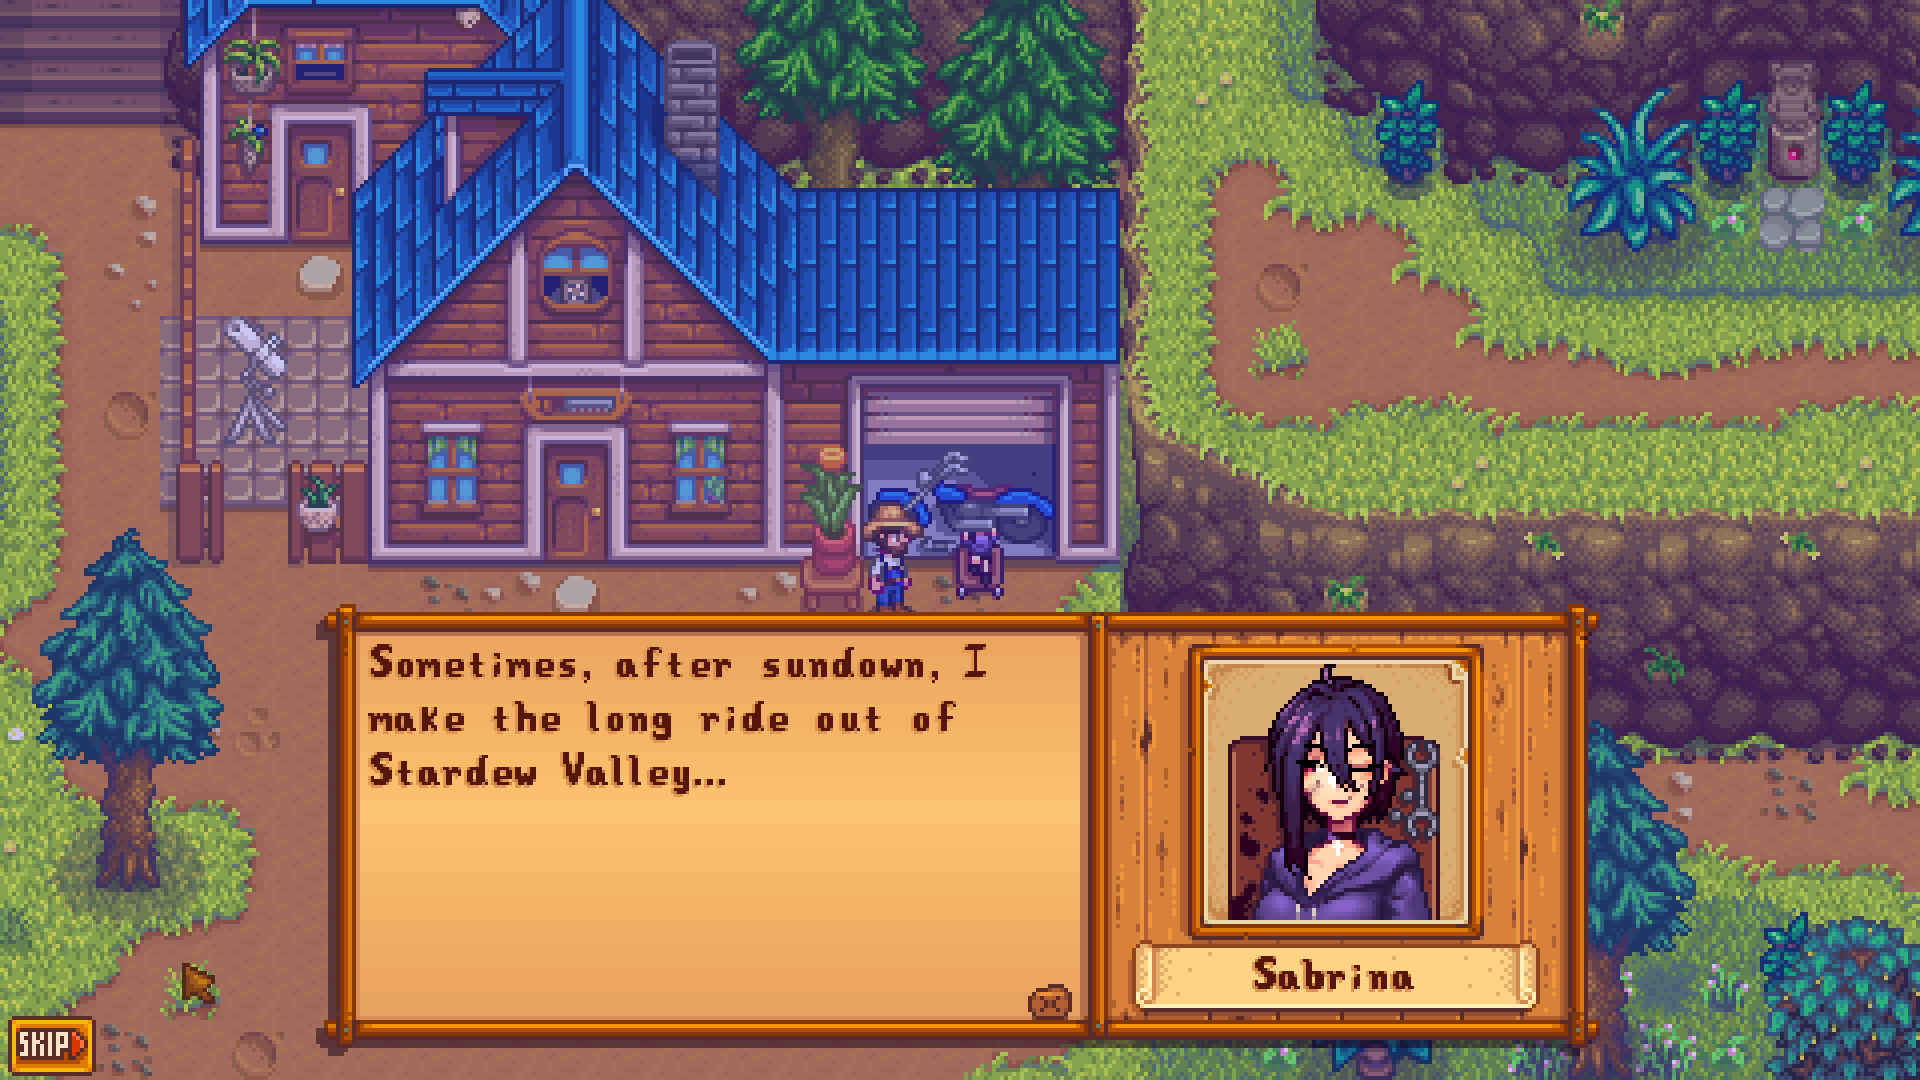 If you’re interested in only dating girls in Stardew Valley, then don’t wor...